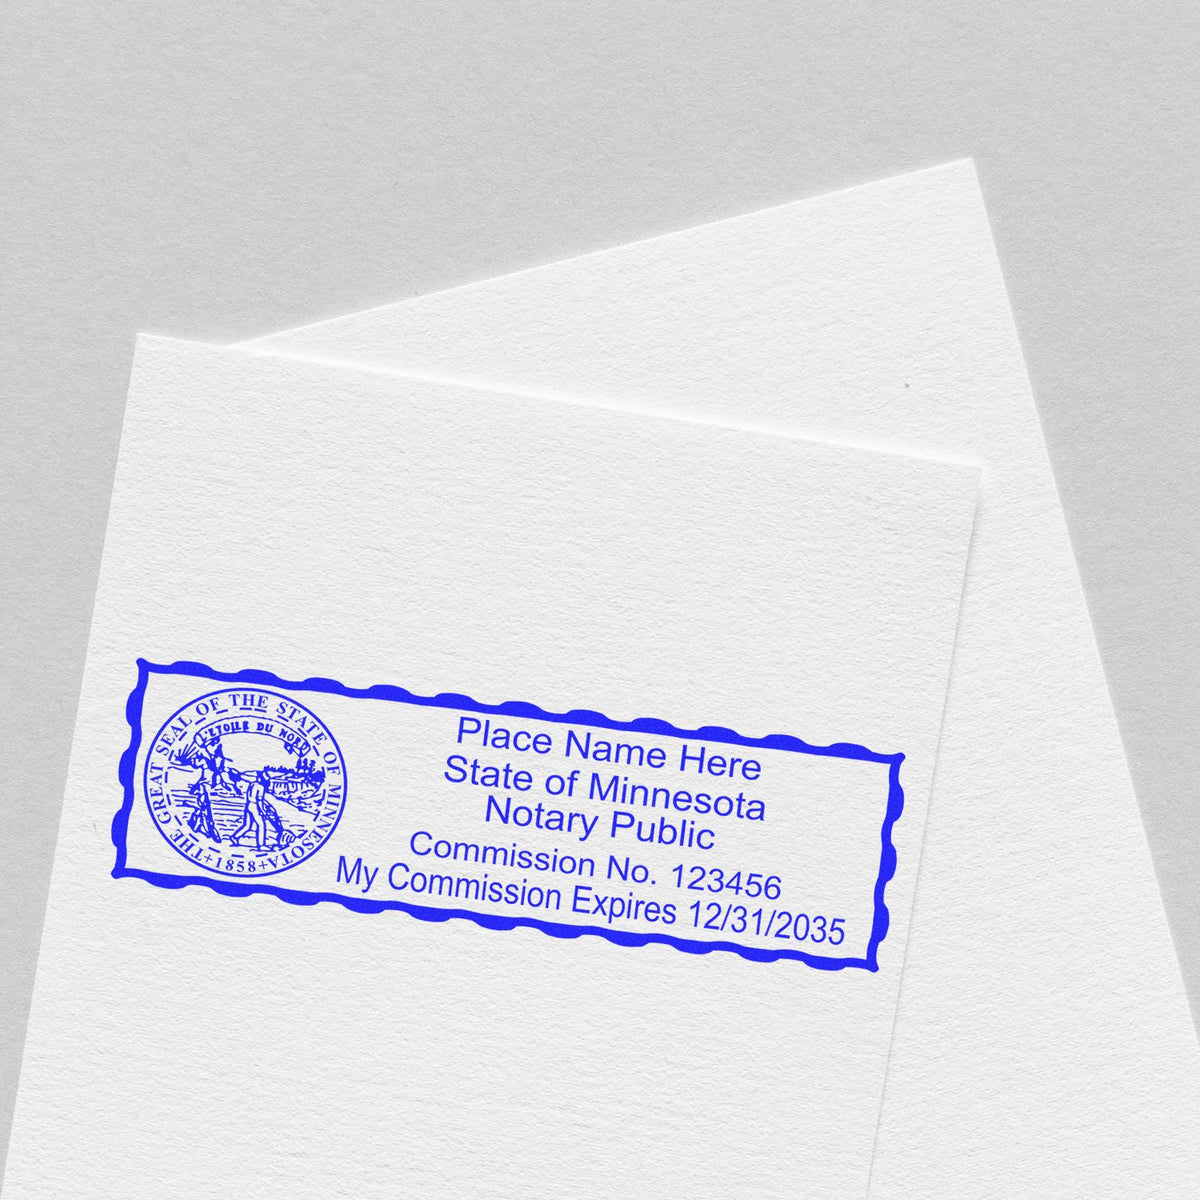 This paper is stamped with a sample imprint of the Wooden Handle Minnesota State Seal Notary Public Stamp, signifying its quality and reliability.